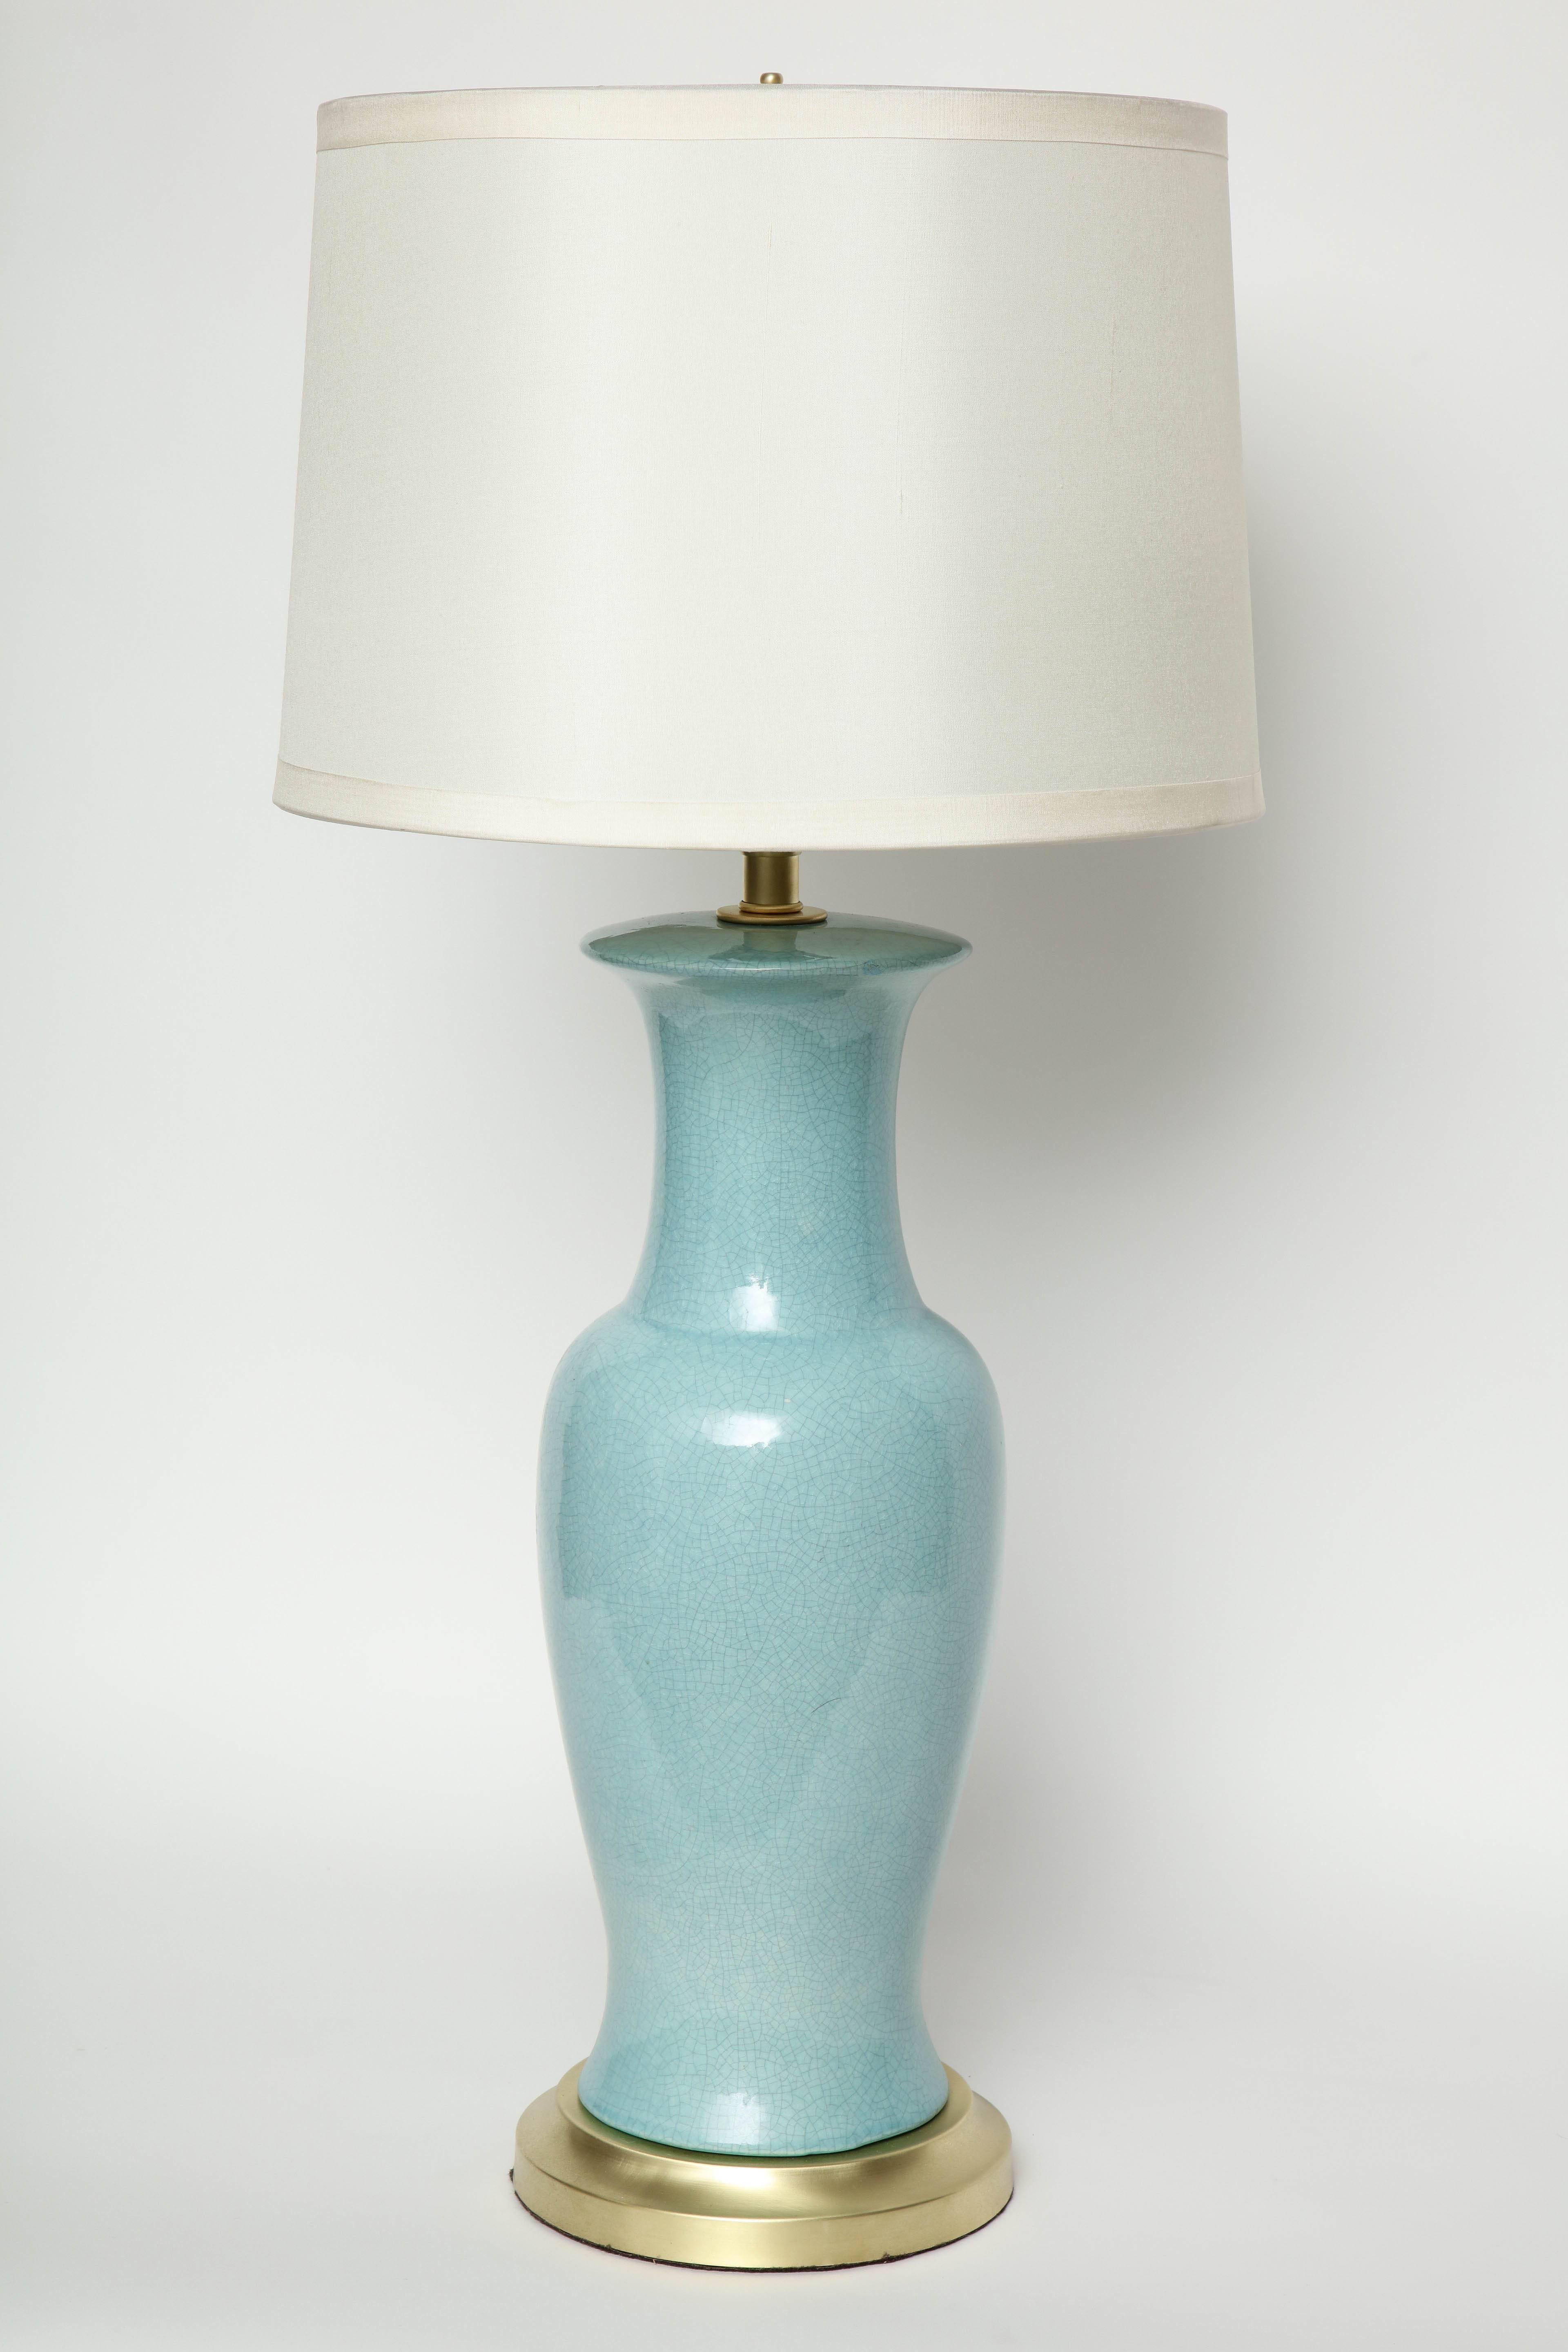 Pair of classically styled midcentury porcelain lamps in a fresh Robin's egg blue glaze with a crackled finish on satin brass bases. Rewired for use in the USA, 100W max.